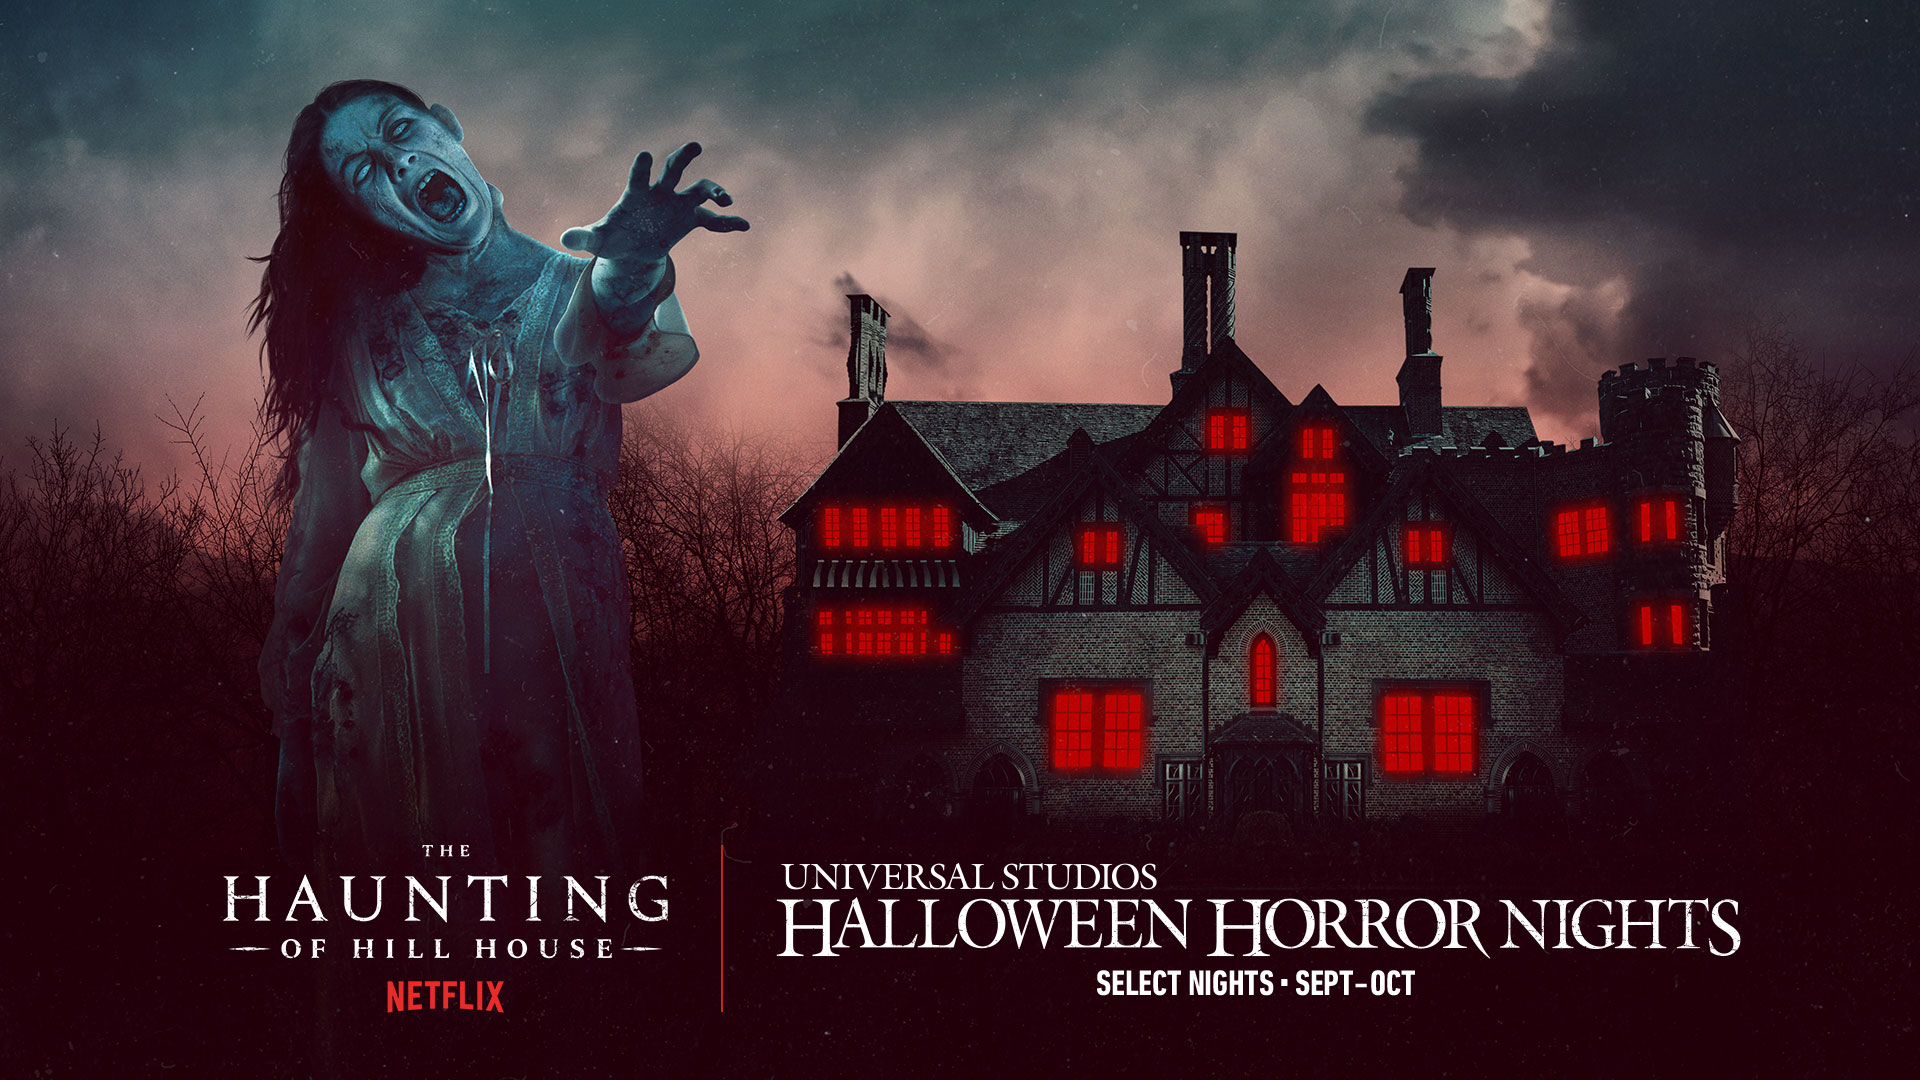 Haunting of Hill House haunted house coming to Halloween Horror Nights |  Inside Universal